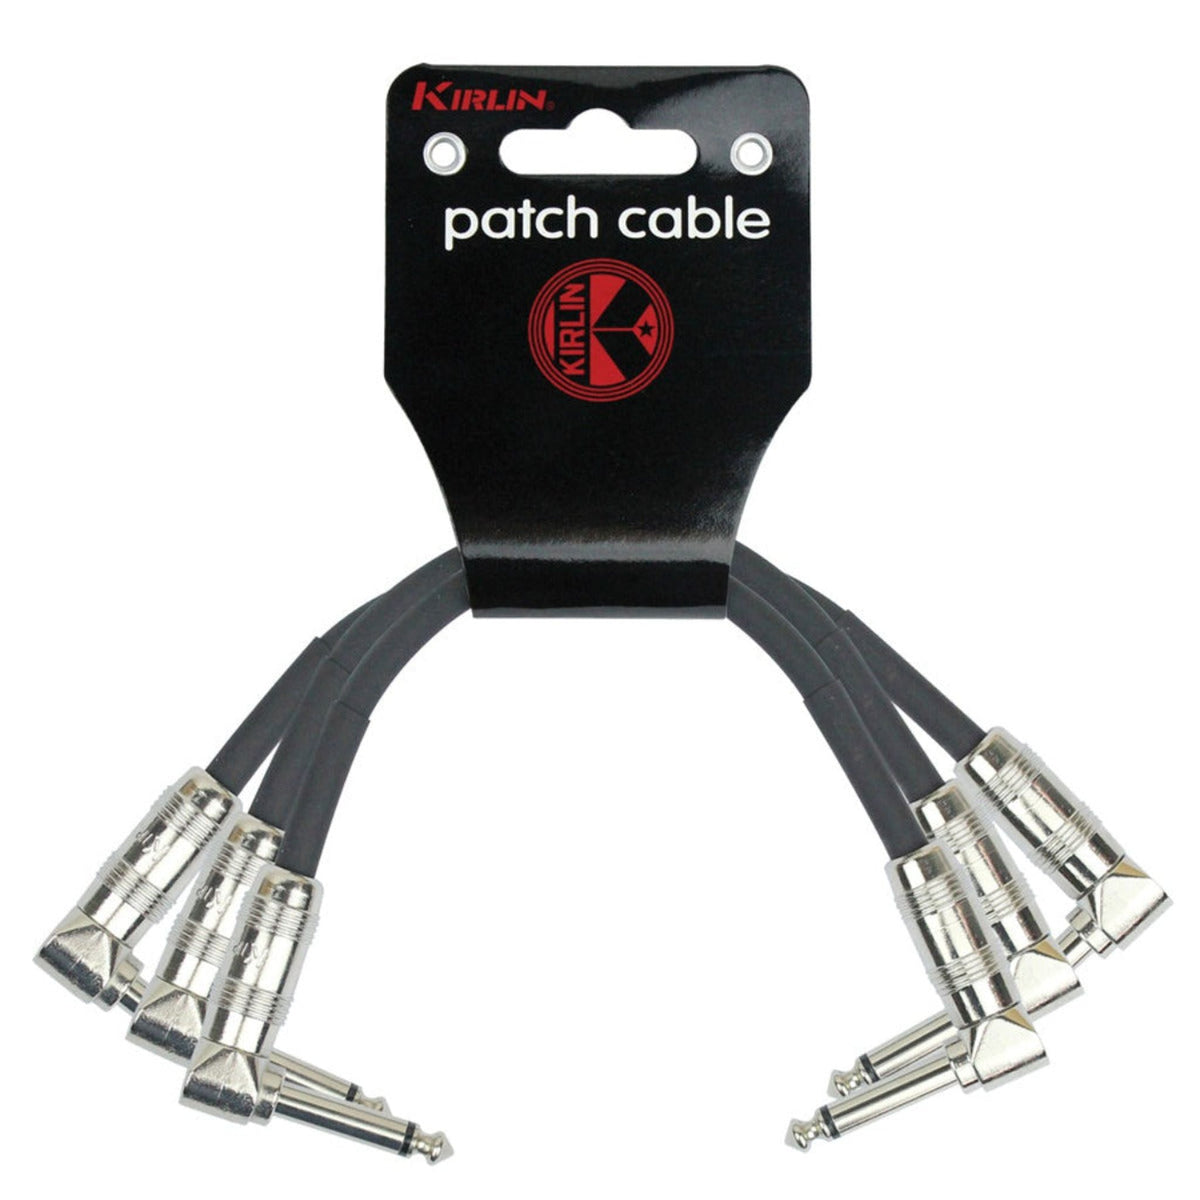 Kirlin Patch Cable 1ft Right Angle 3 Pack